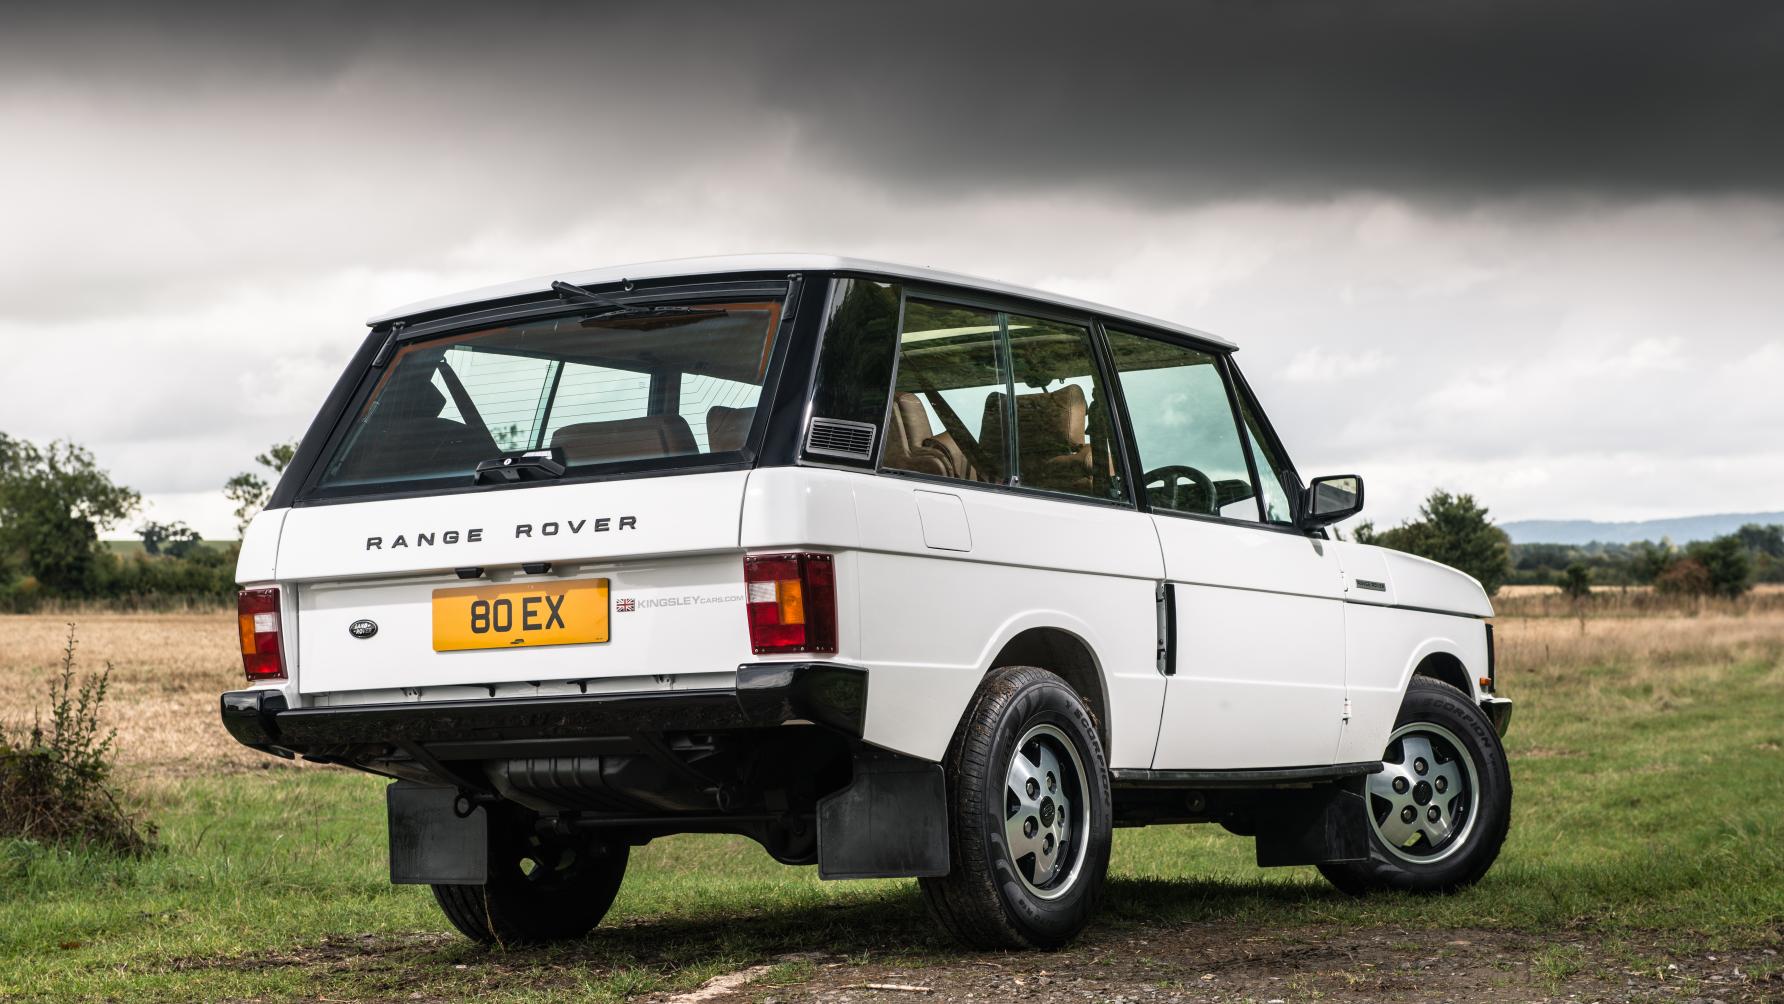 This restomod Range Rover Classic costs £95,000. Is it worth the cash?